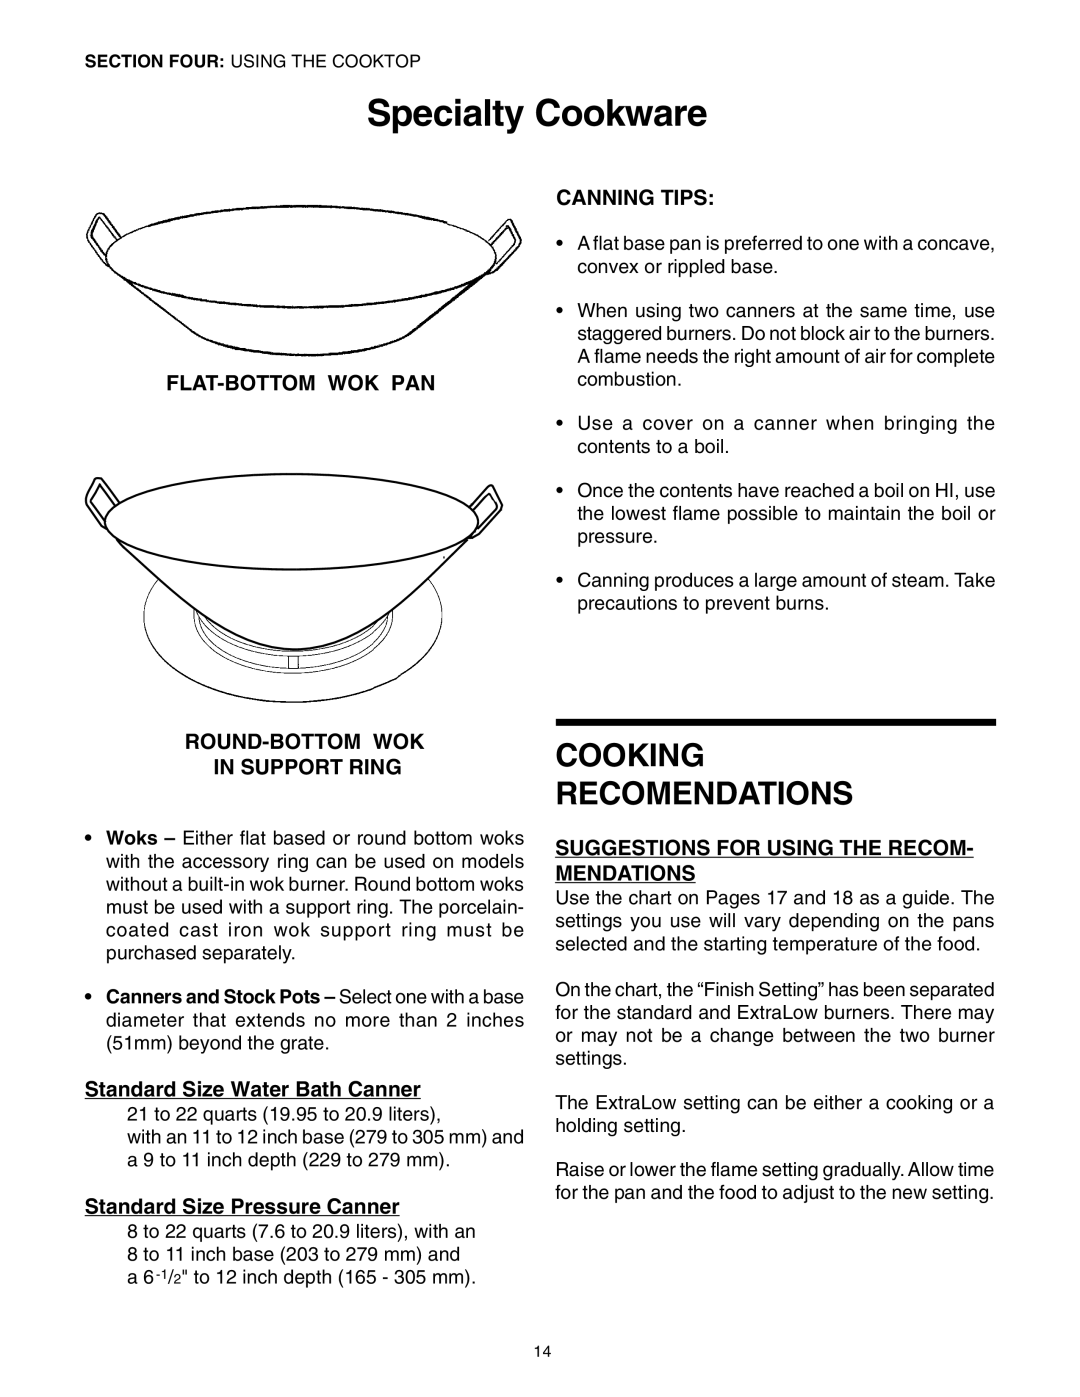 Thermador PG30 Specialty Cookware, Cooking Recomendations, Canning Tips, Flat-Bottomwok Pan, Standard Size Pressure Canner 